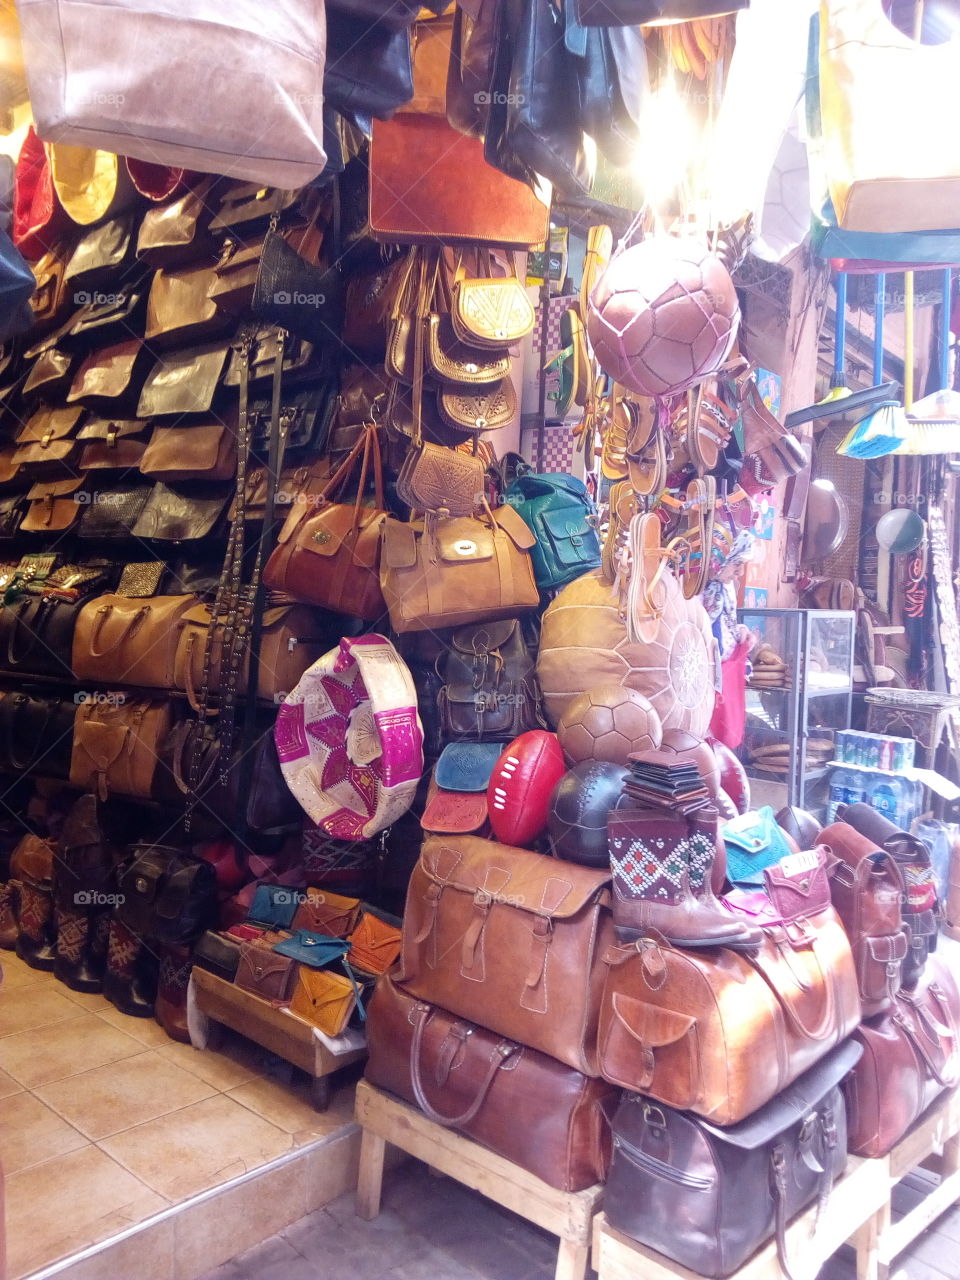 The traditional industry in Marrakech